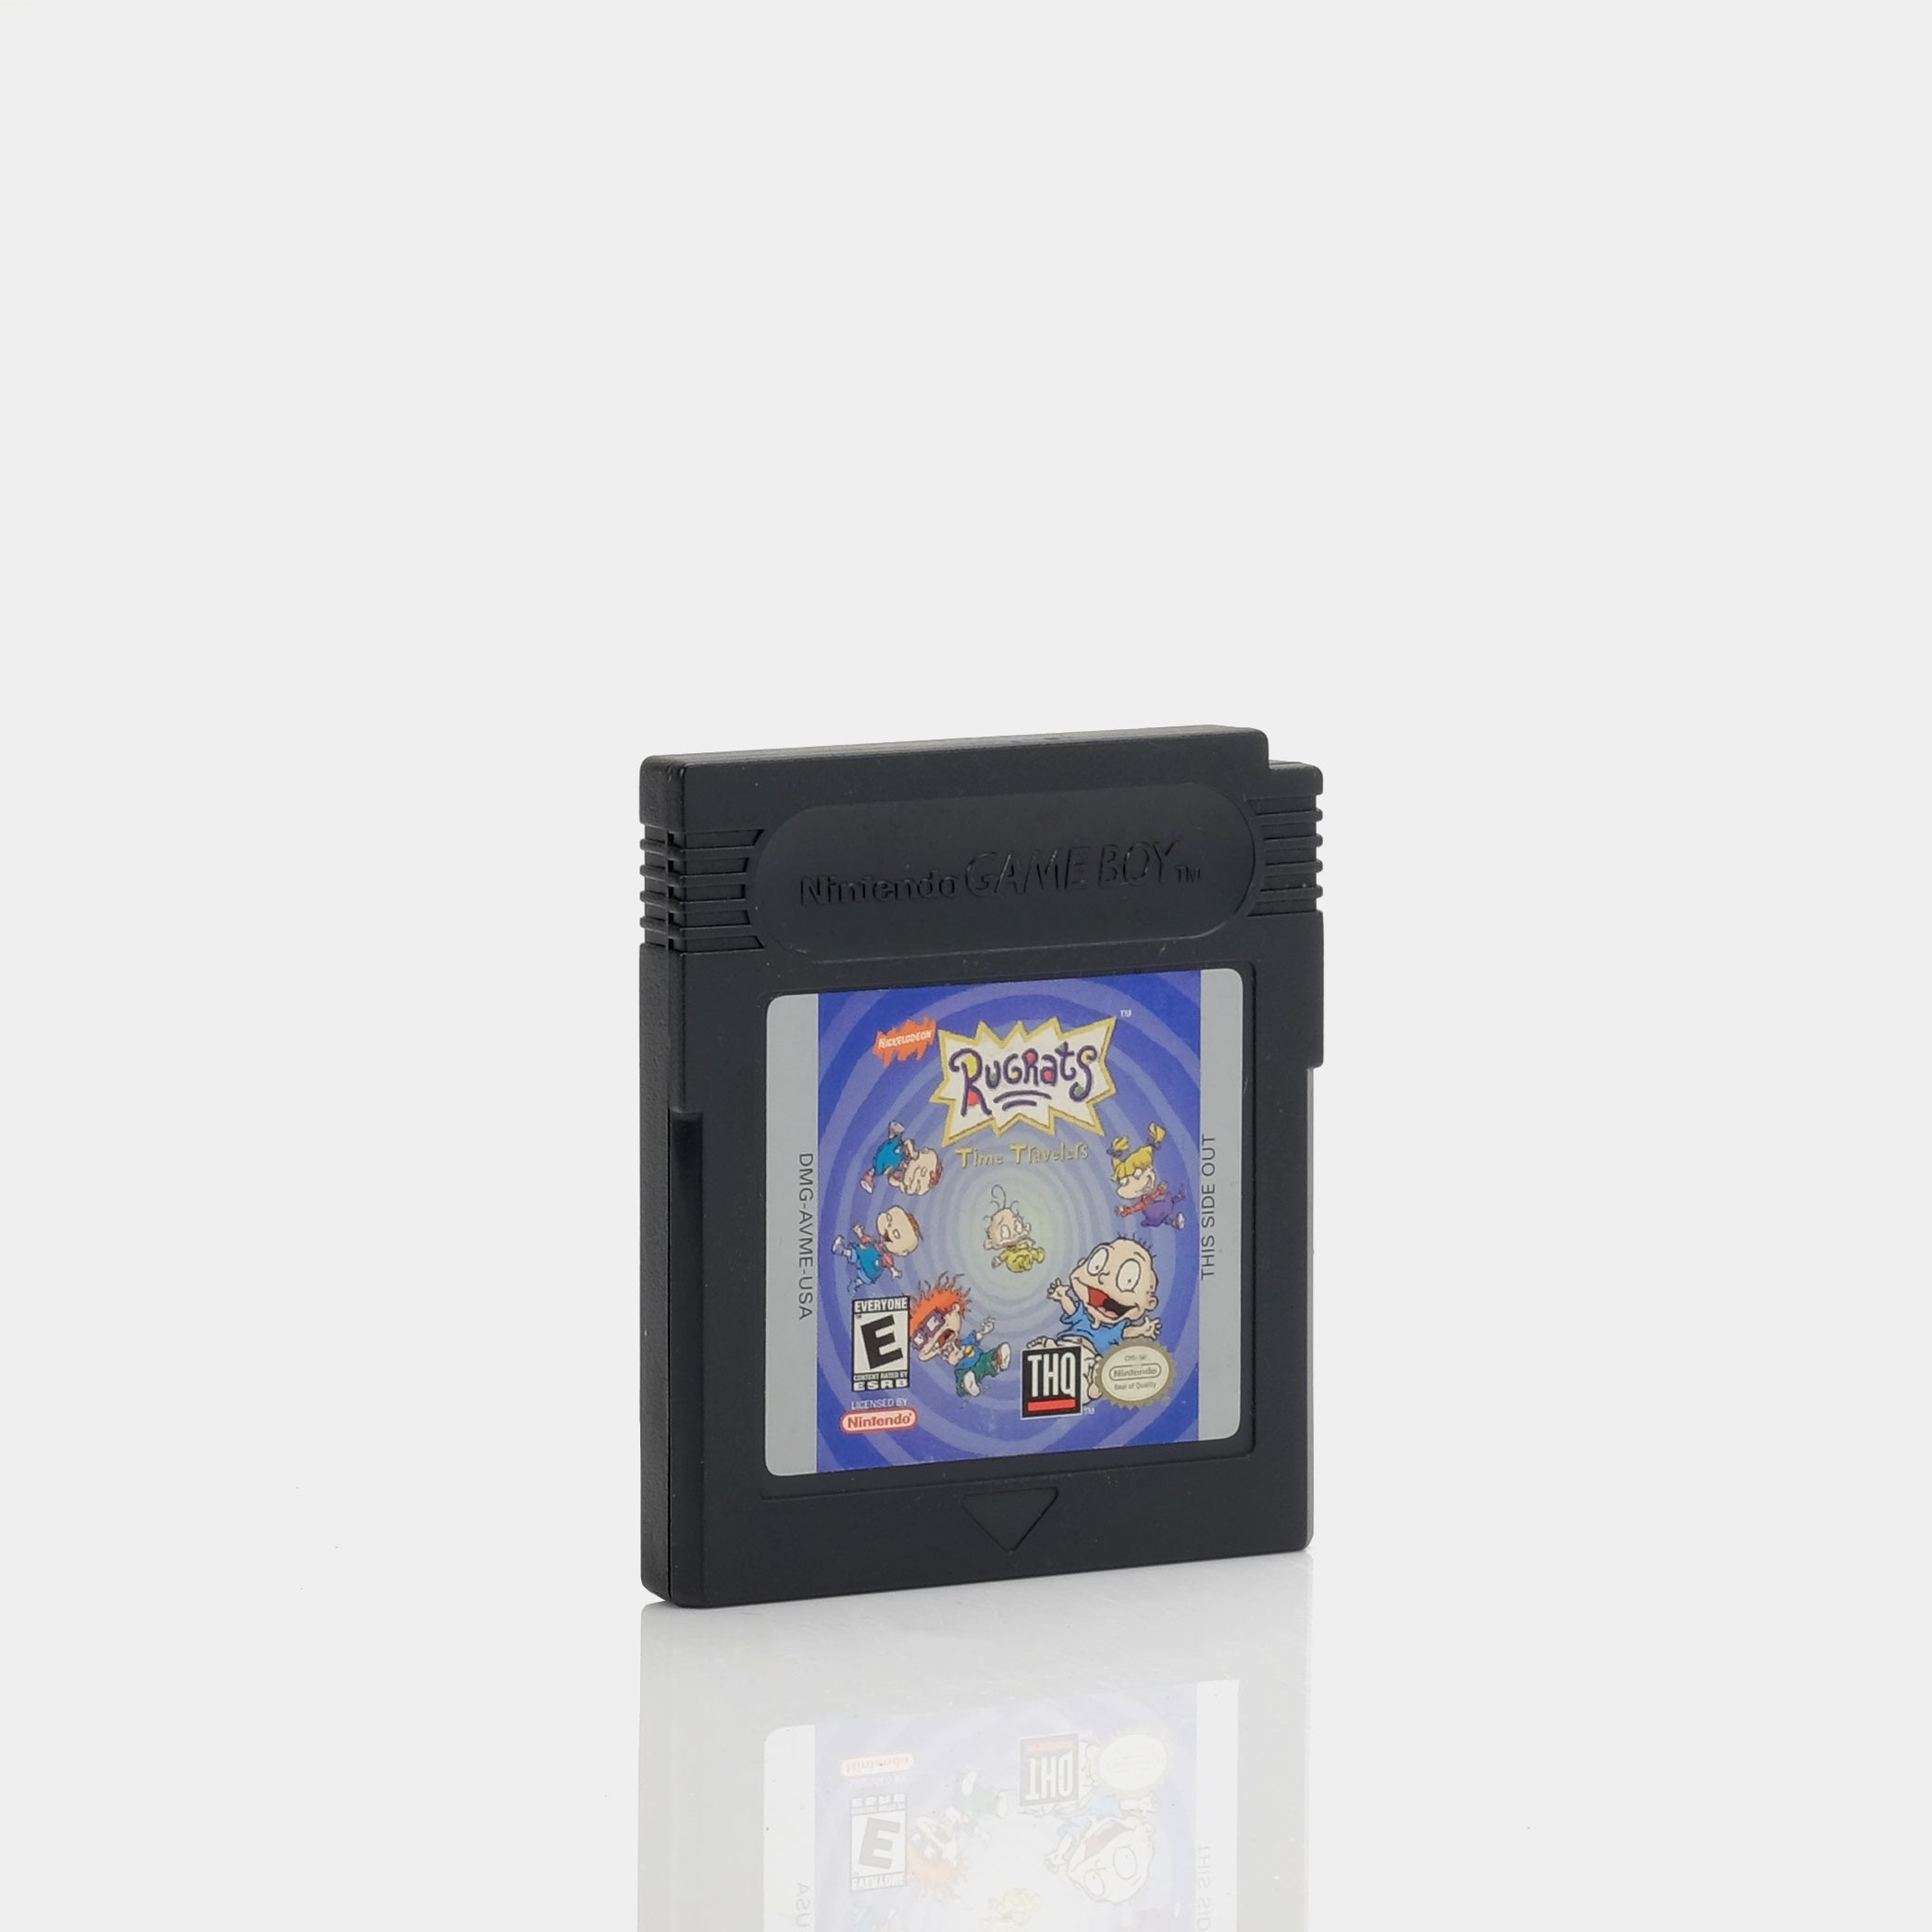 Rugrats: Time Travelers Game Boy Color Game